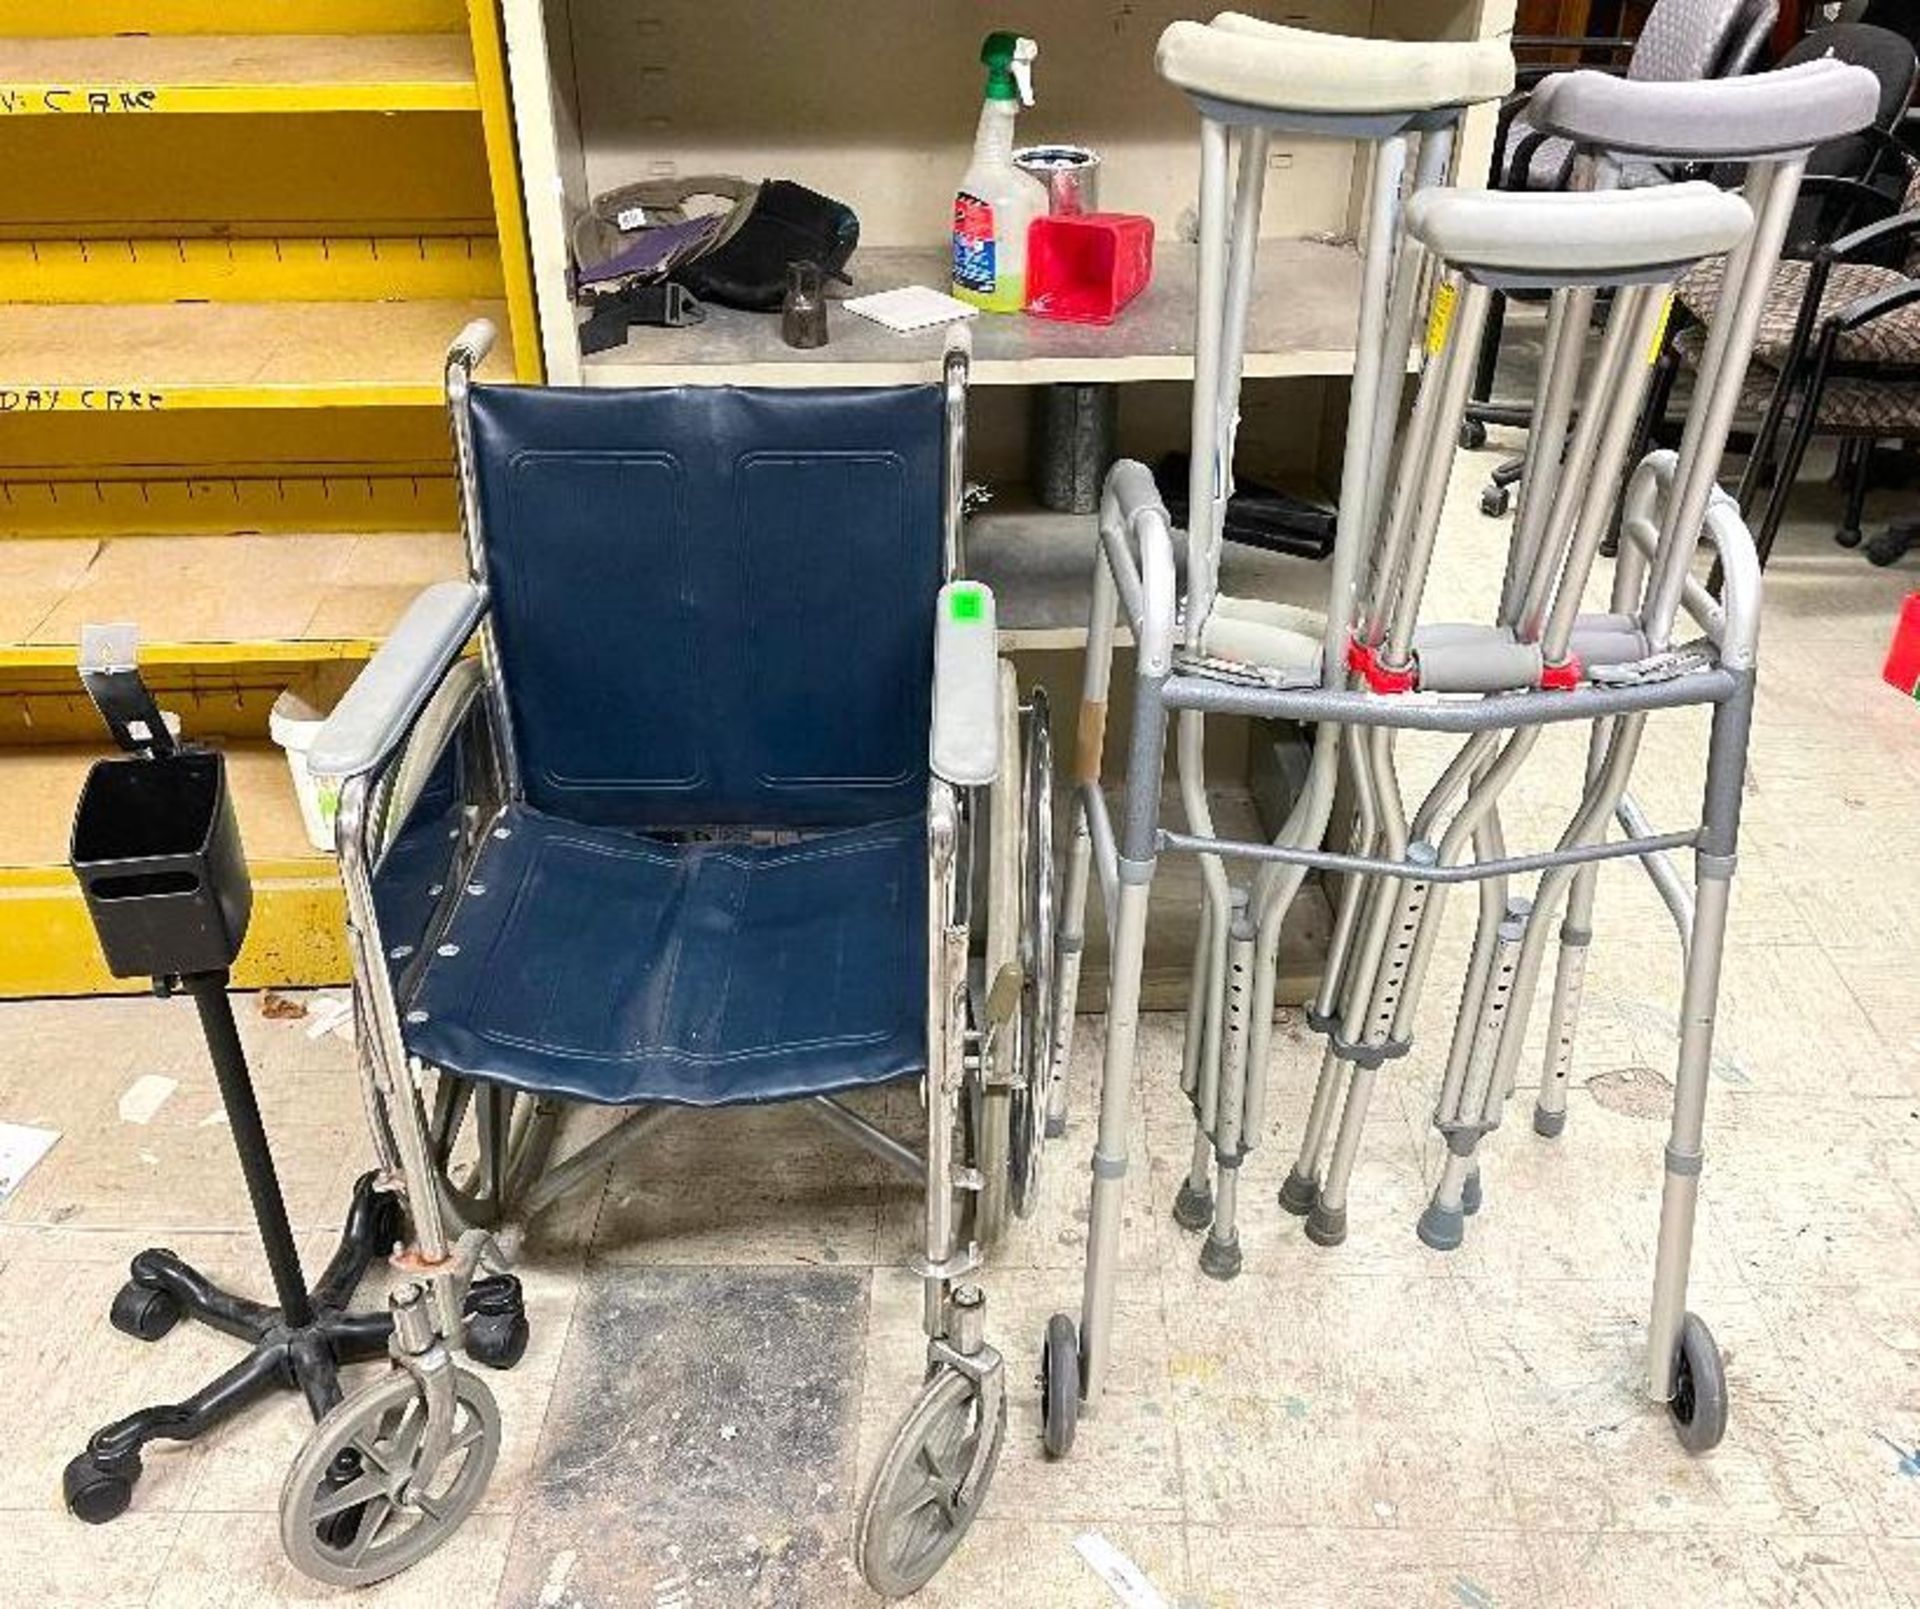 DESCRIPTION: LARGE GROUP OF ASSORTED TRANSPORTATION AIDS - WHEEL CHAIR / CRUTCHES / WALKER THIS LOT